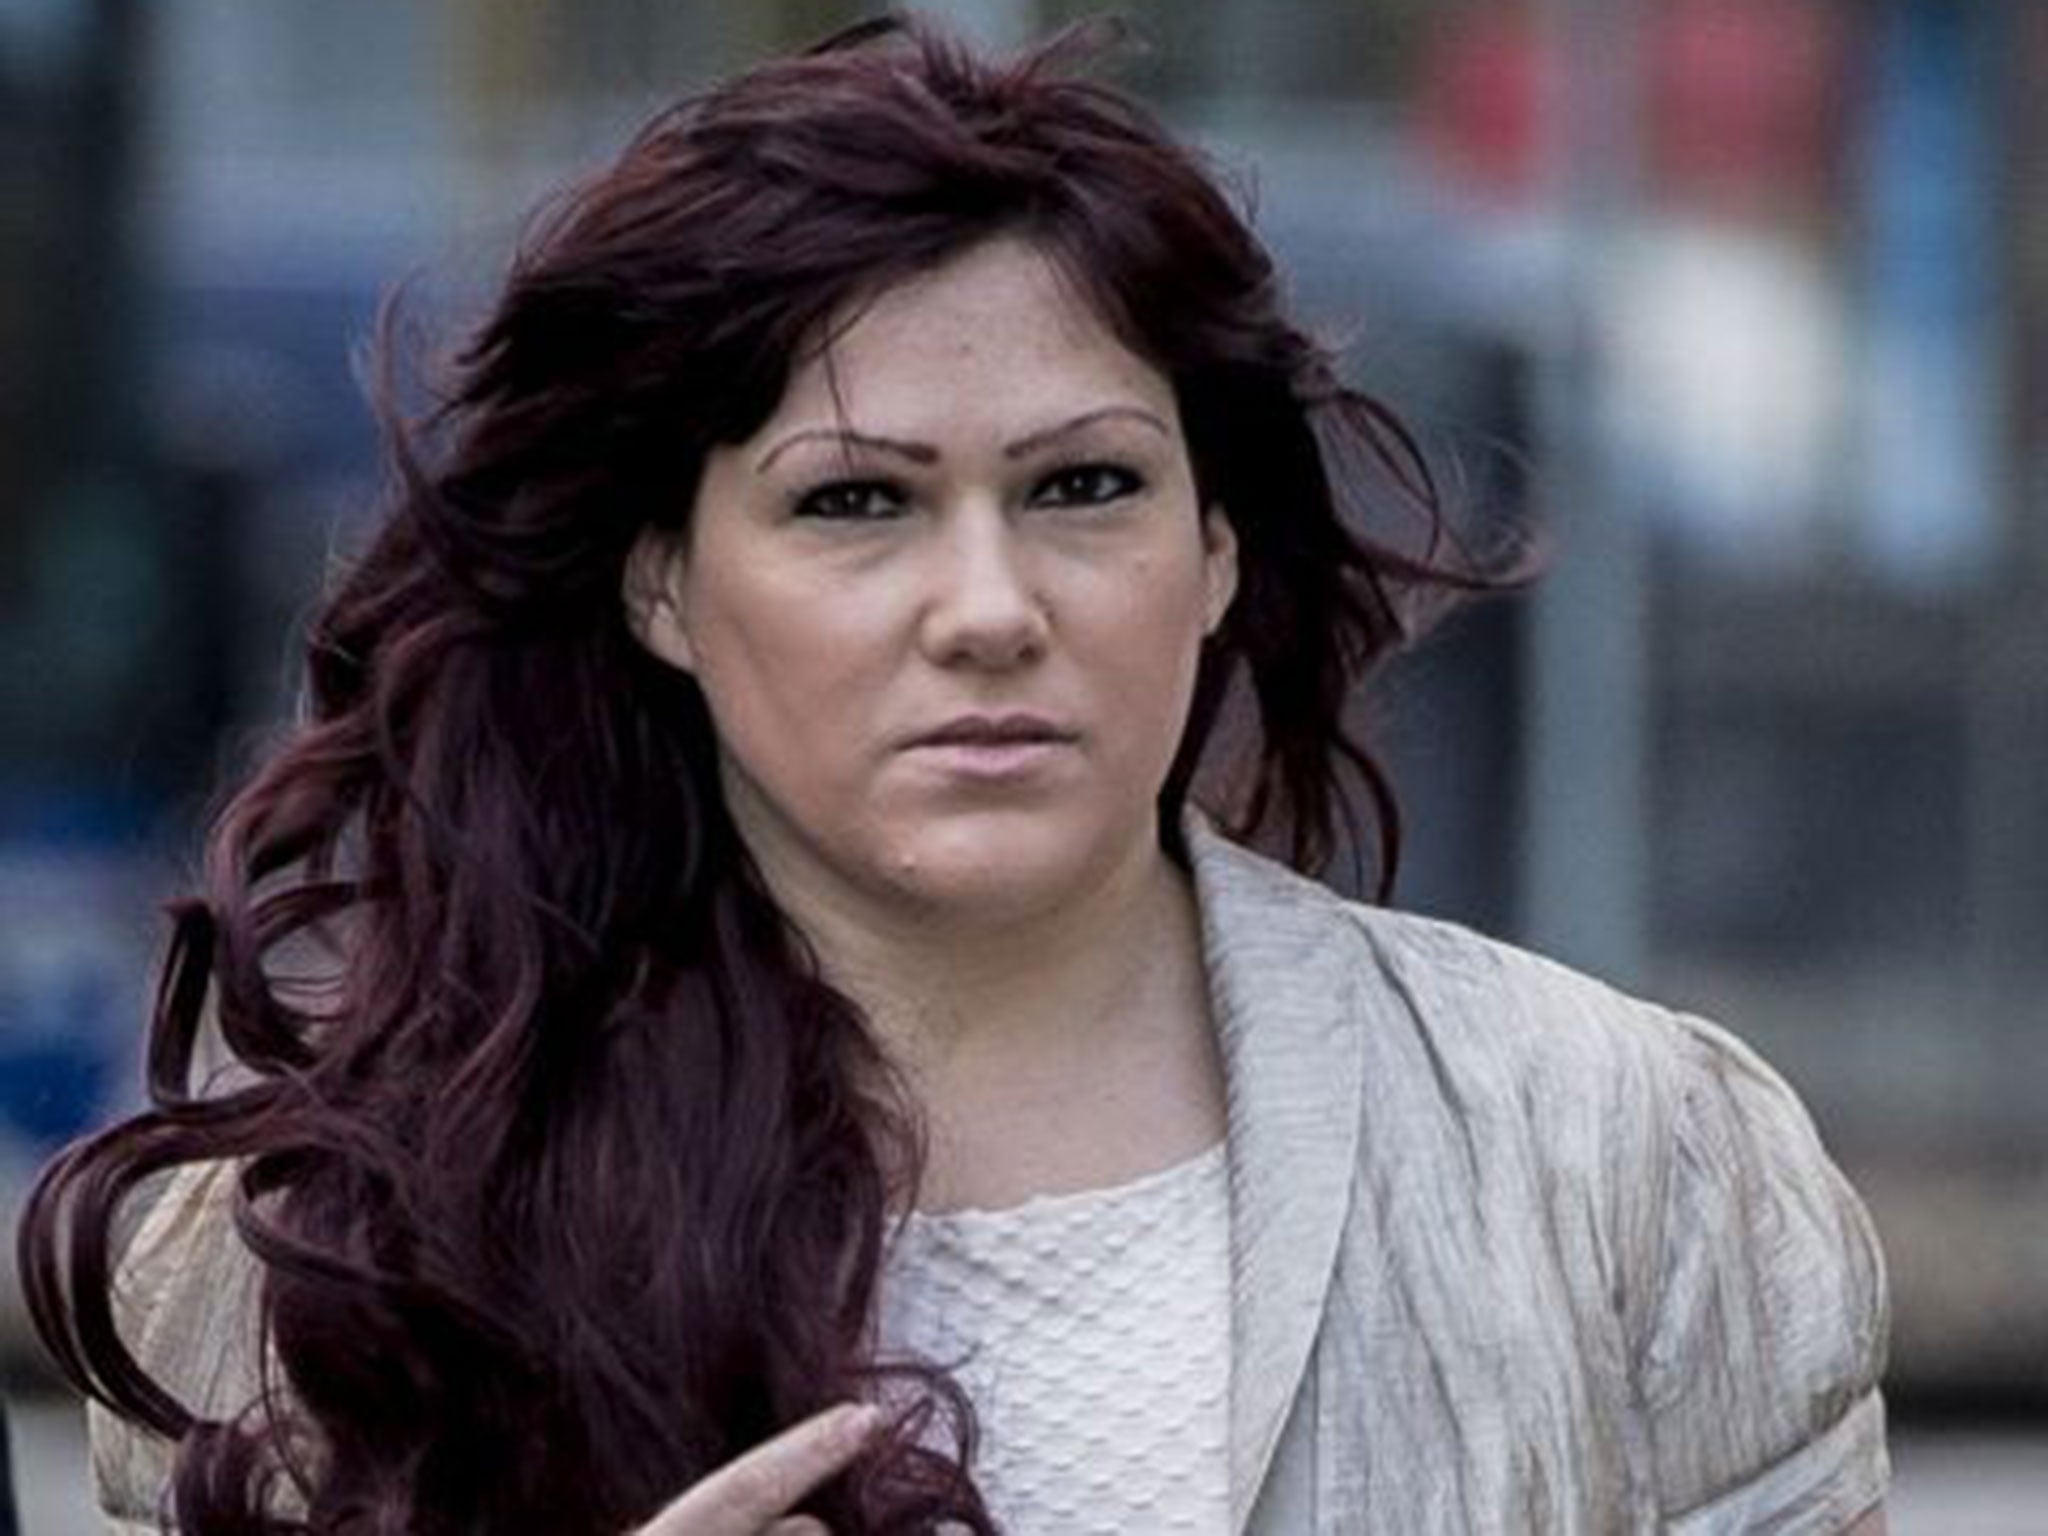 Ian Watkins trial Singers ex-girlfriend Joanne Mjadzelics took mother of baby he wanted to rape to police, court told The Independent The Independent